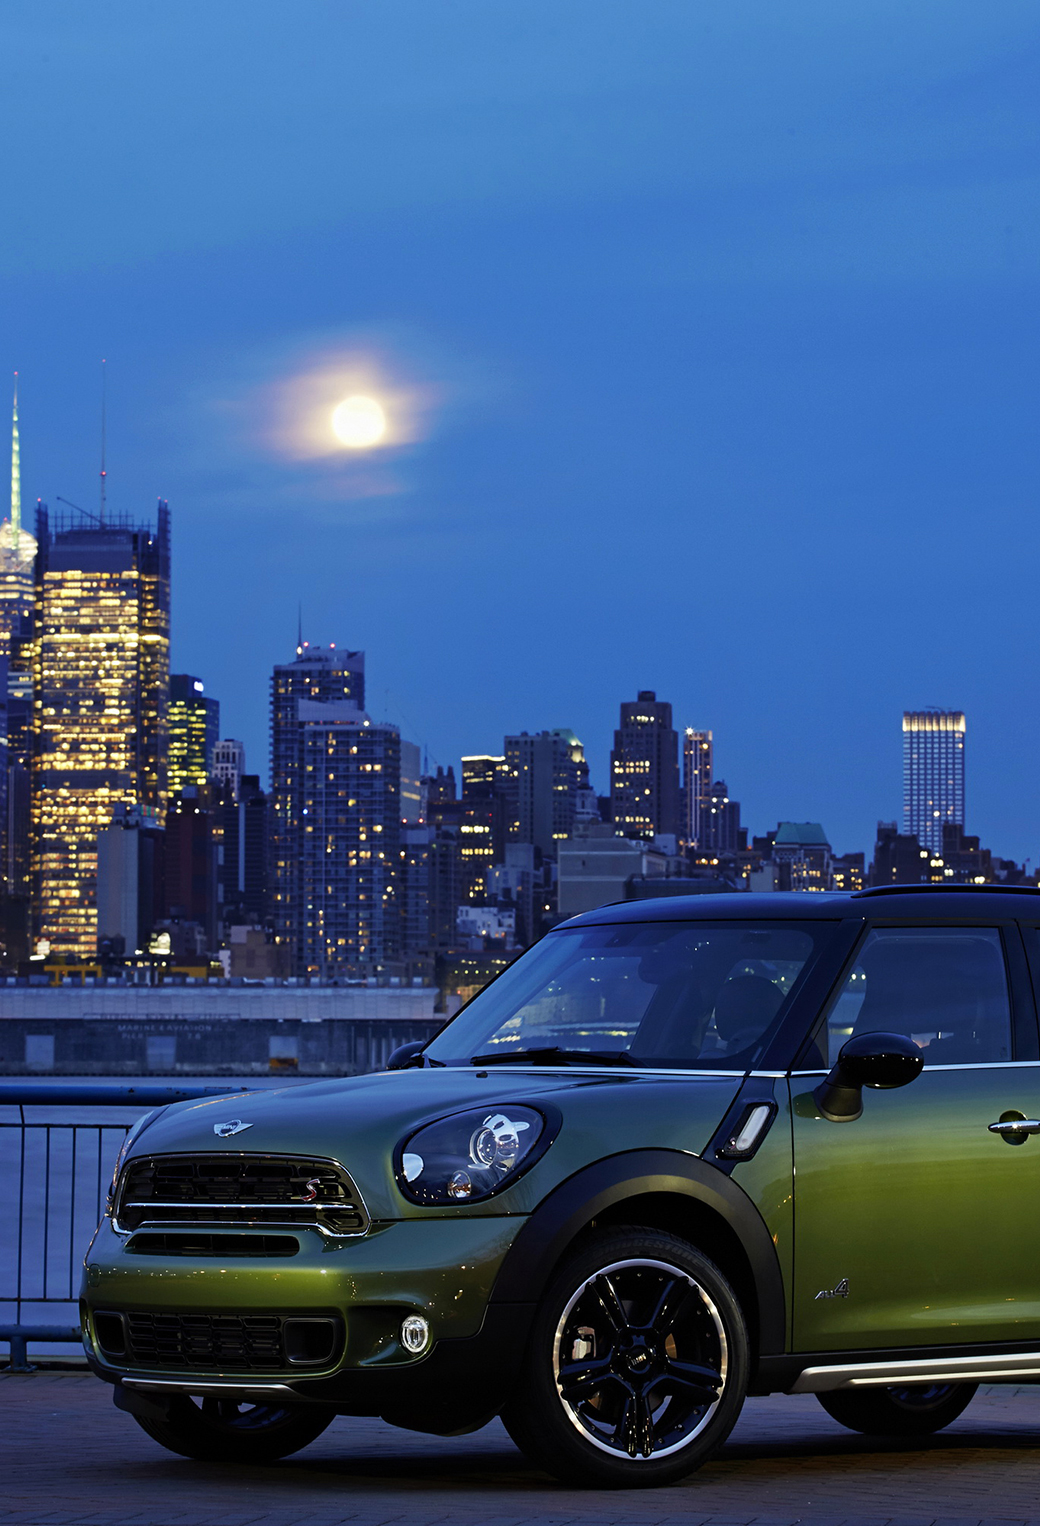 Mini Cooper Wallpaper For Iphone Land Vehicle Vehicle Car Mini Mini Cooper Wallpaperuse